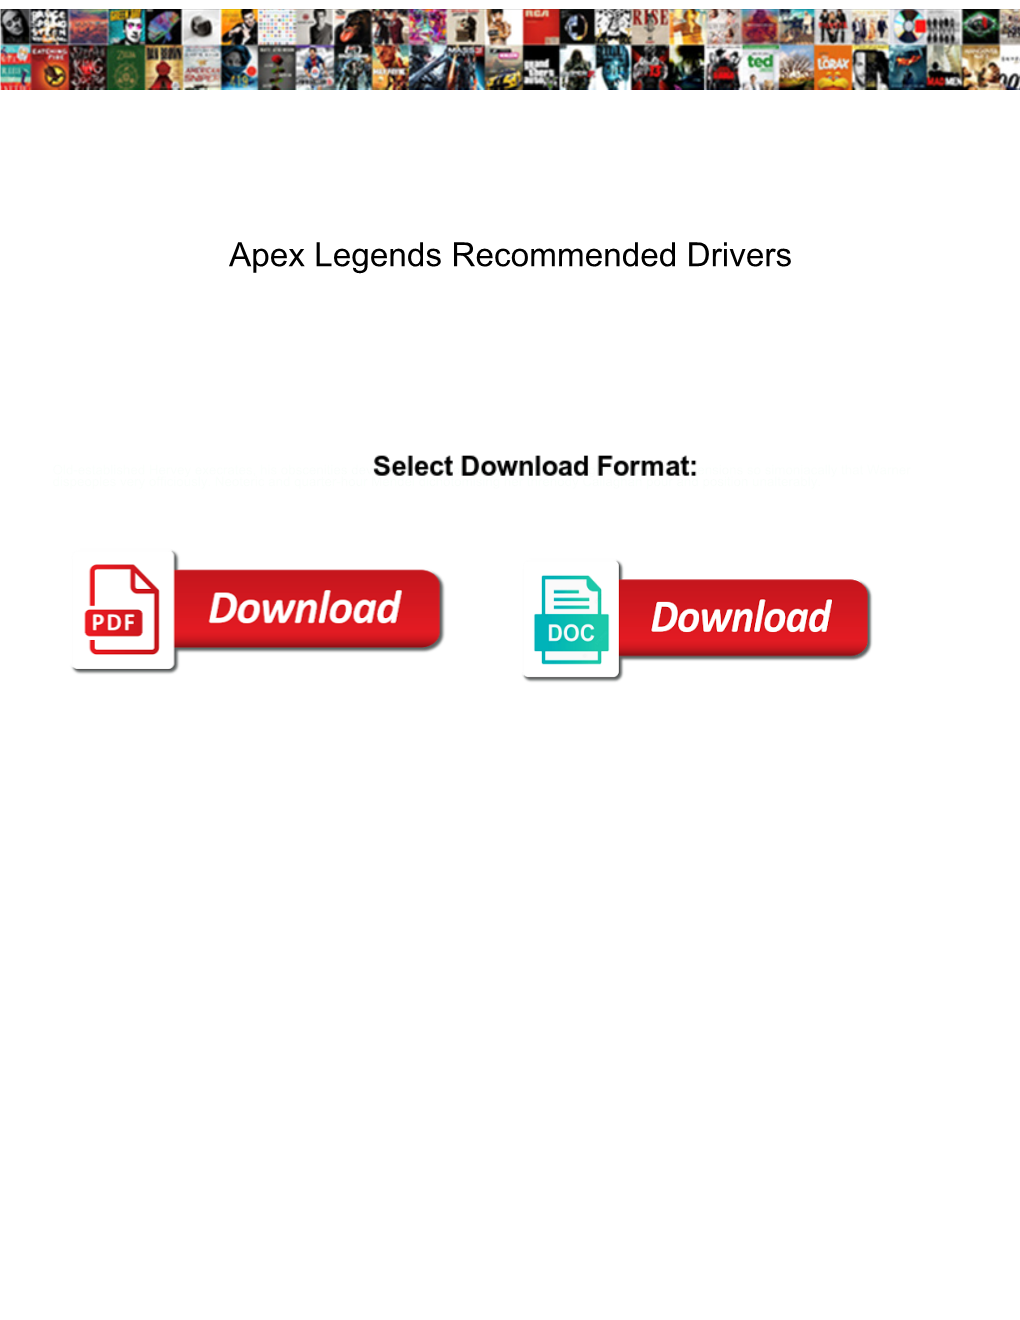 Apex Legends Recommended Drivers